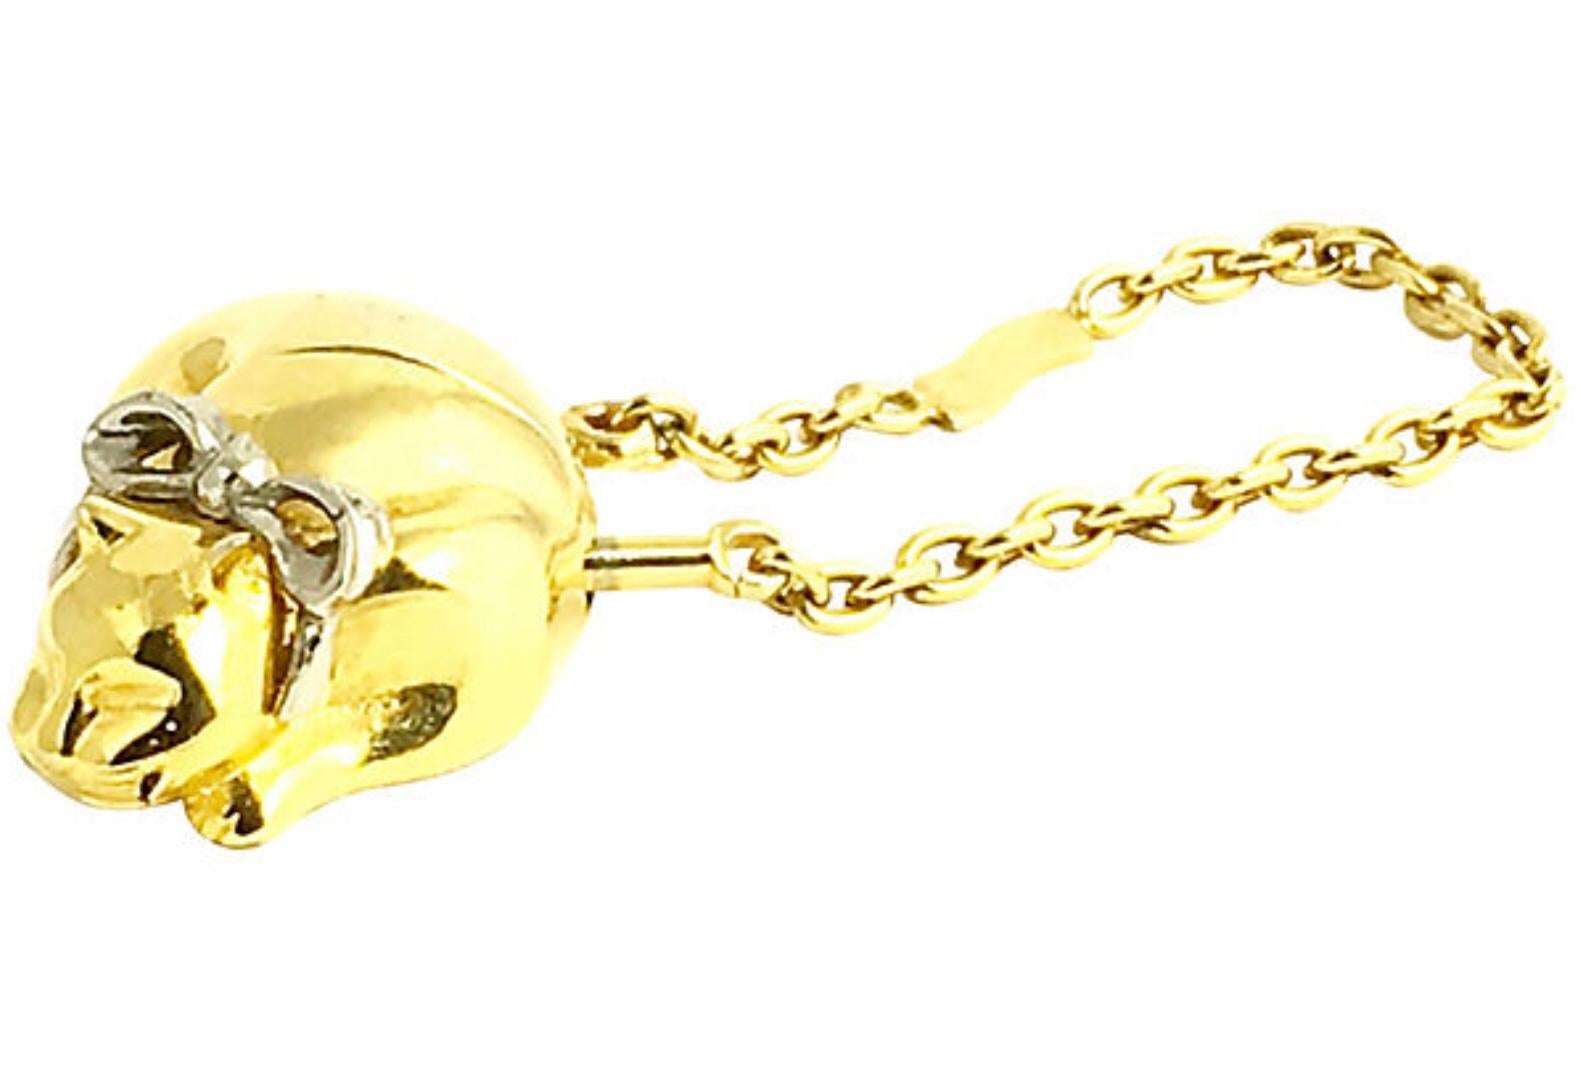 Judith Leiber goldtone metal cat keychain with a silvertone ribbon. Marked: Judith Leiber. Chain: 4.75